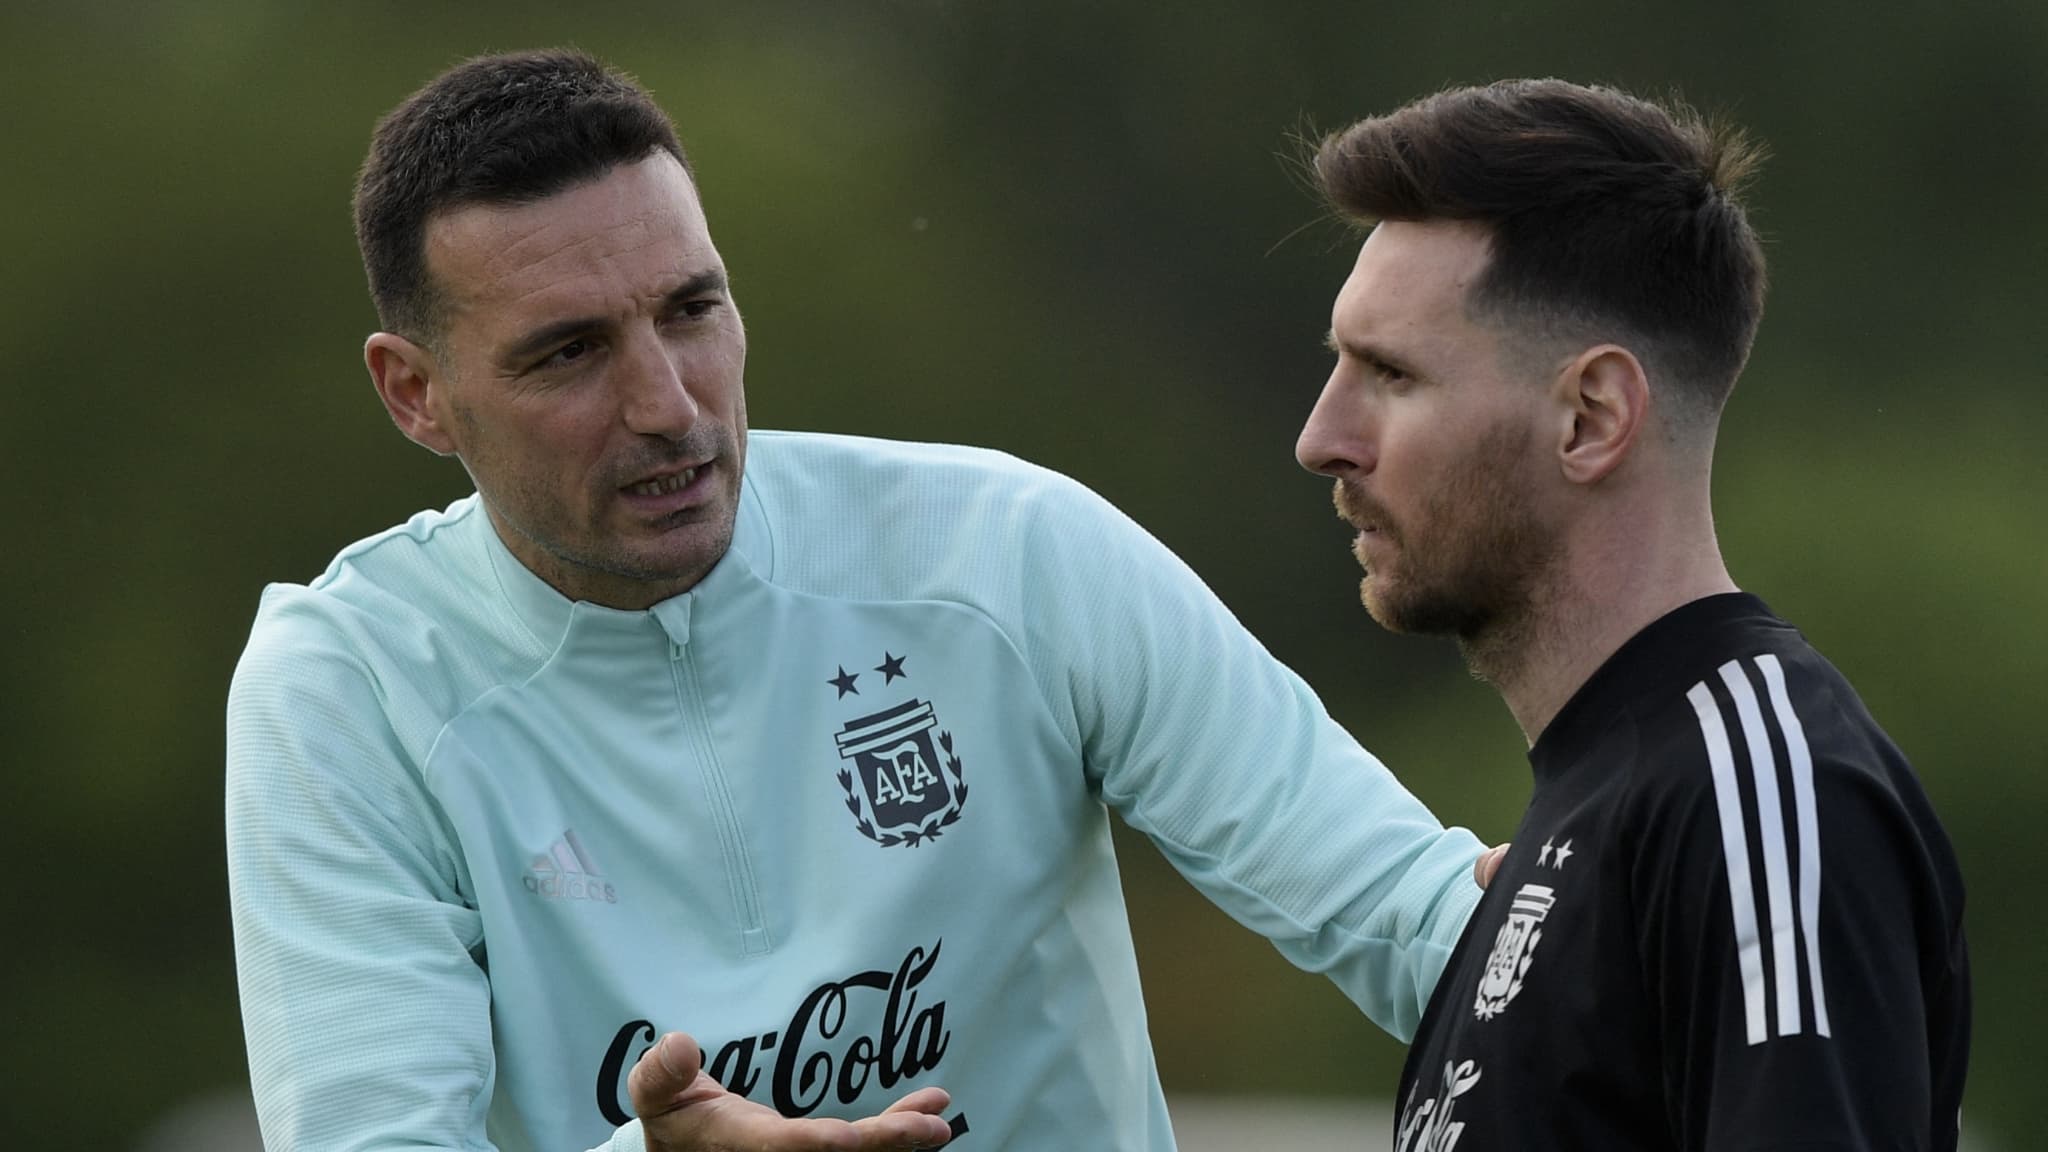 “Messi is like Federer,” according to Scaloni